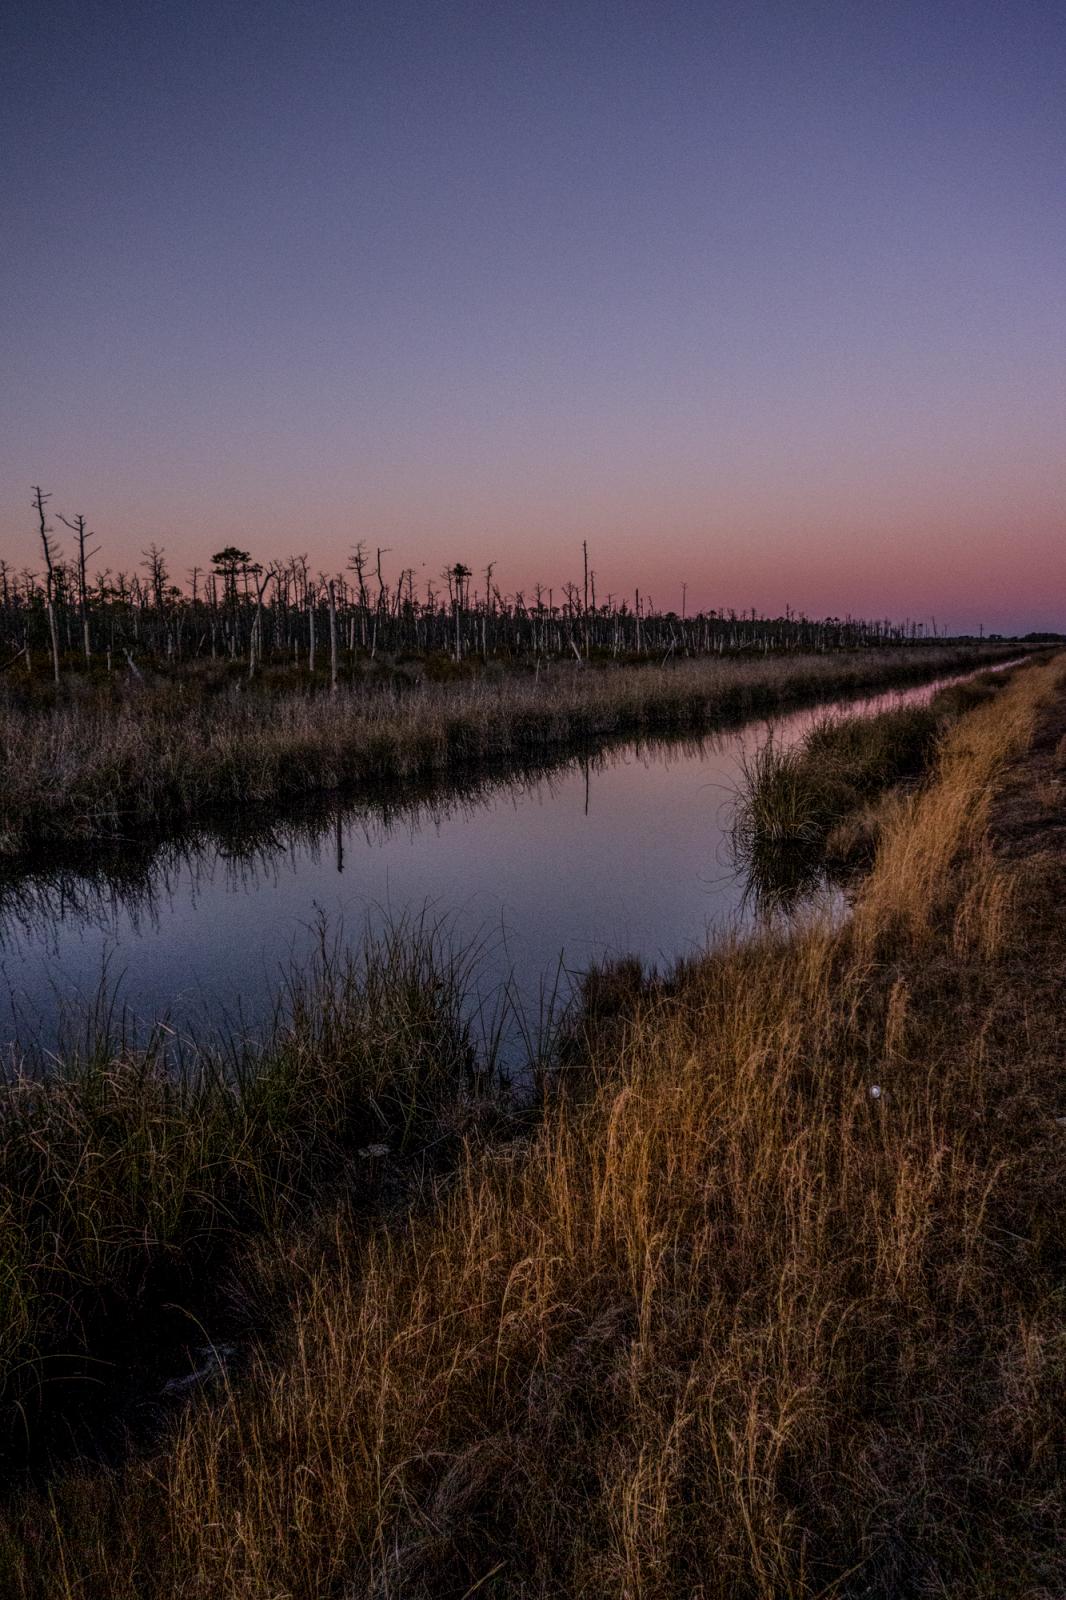 Shifting Sands - In areas just west of the Outer Banks like the Alligator River National Wildlife Refuge, ghost...